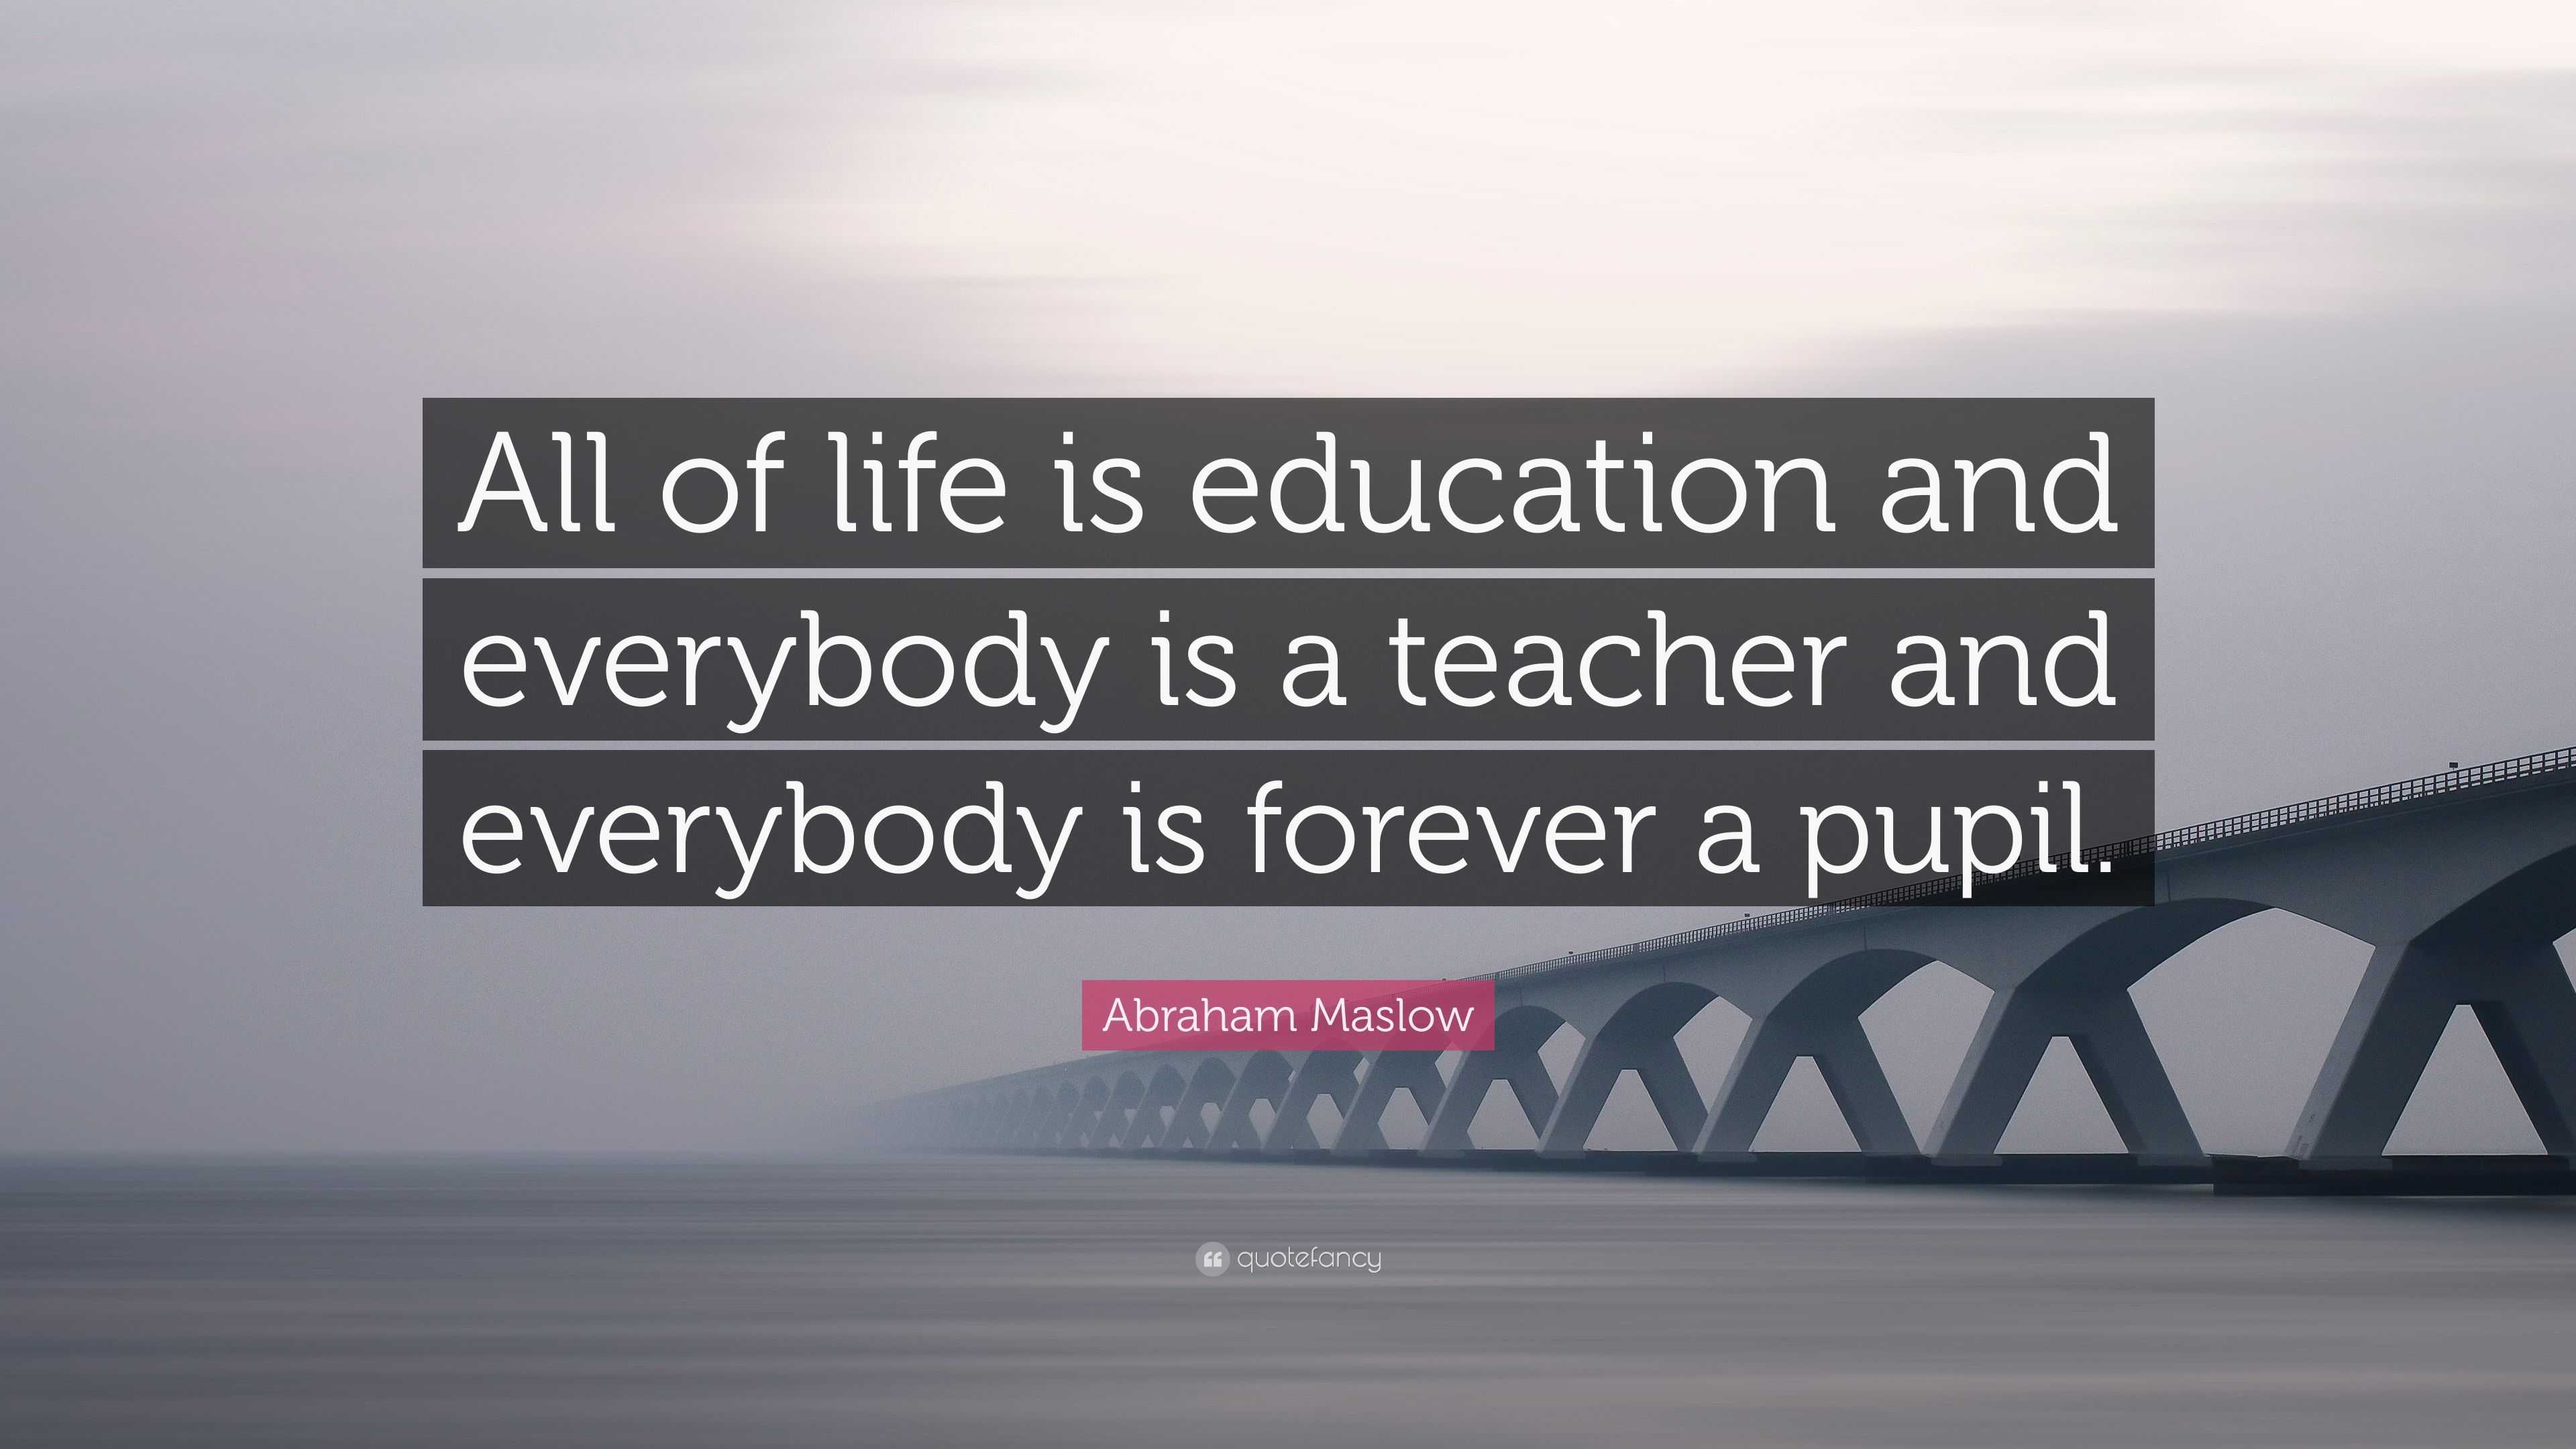 Abraham Maslow Quote: “All of life is education and everybody is a ...